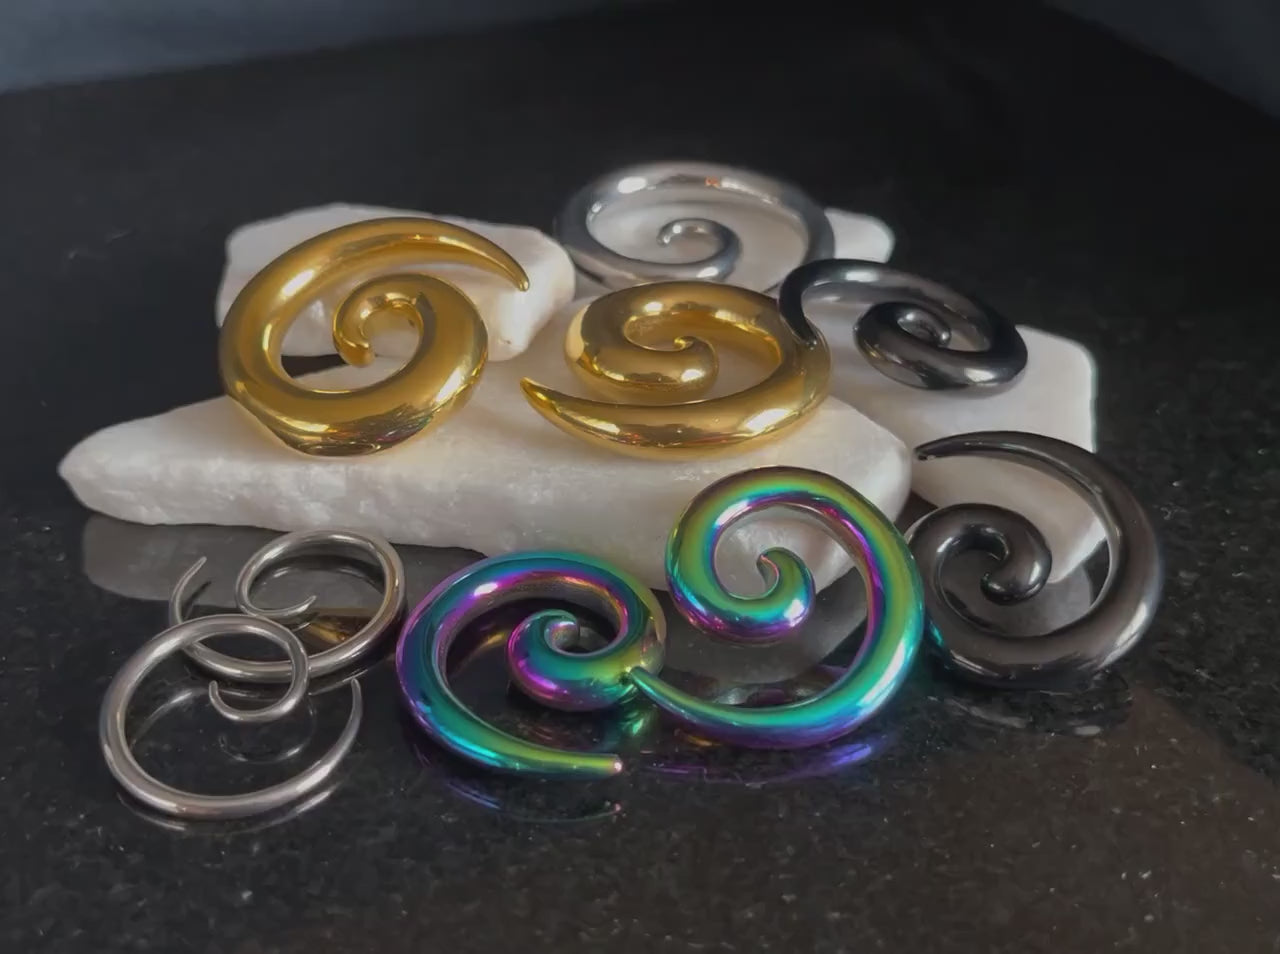 PAIR of Unique Stainless Steel Spiral Tapers Expanders - Black, Gold or Rainbow - Gauges 12g (2mm) thru 2g (6mm) available!